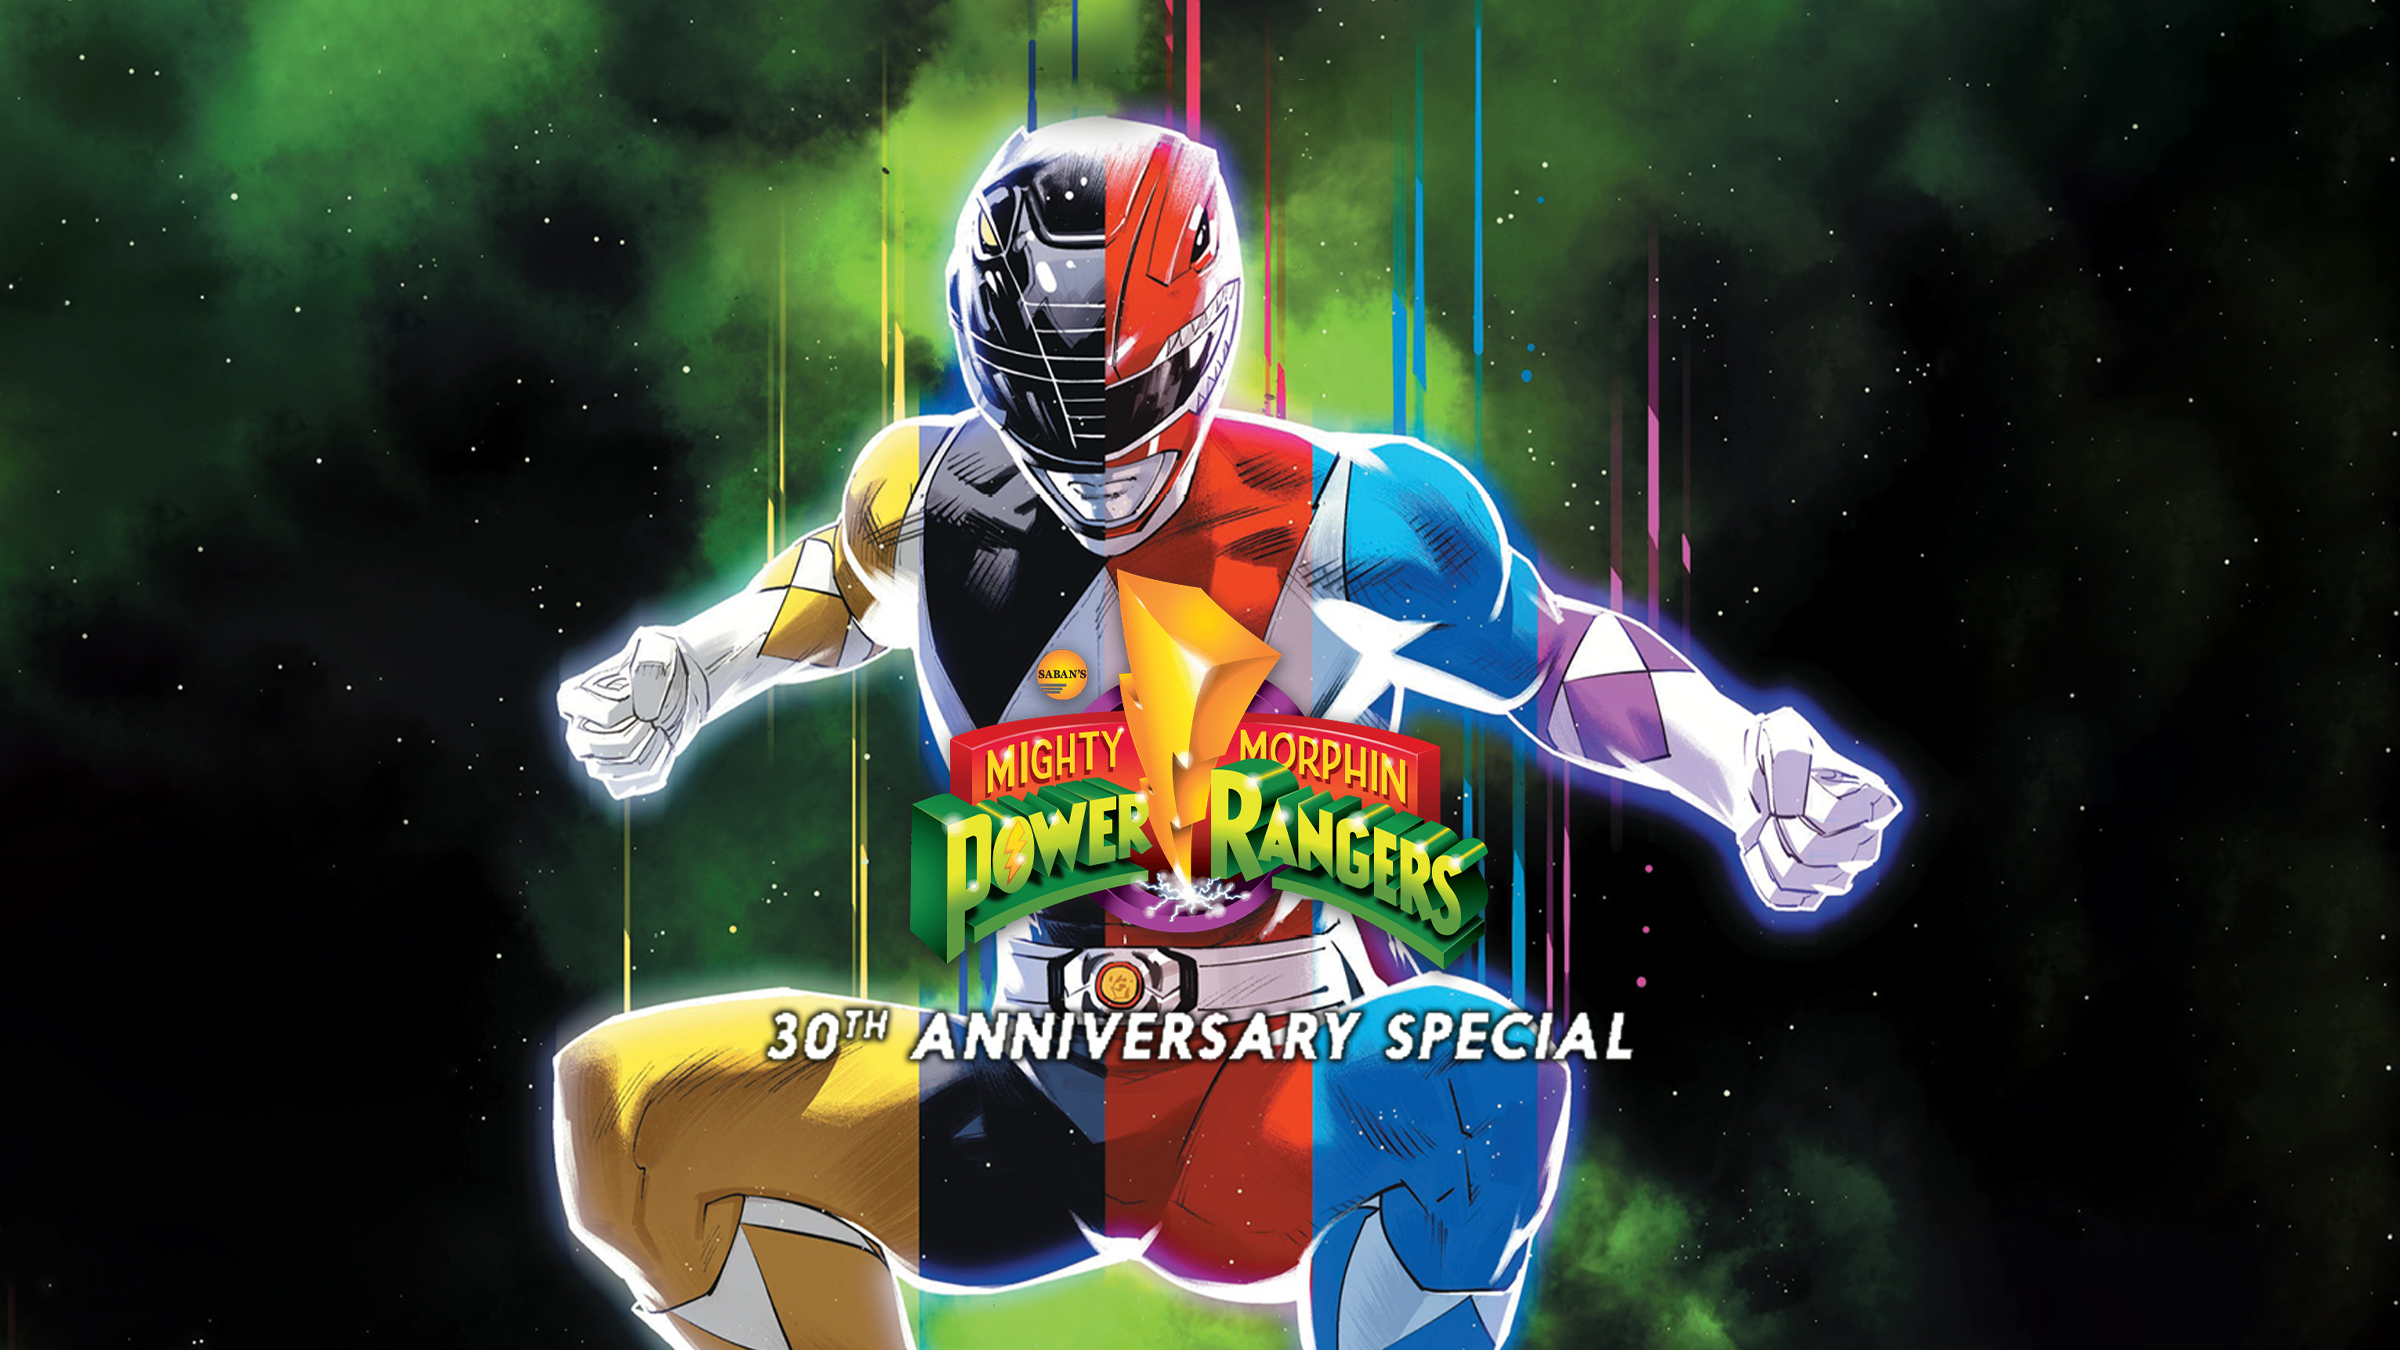 Mighty Morphin Power Rangers 30th Anniversary Special Comic